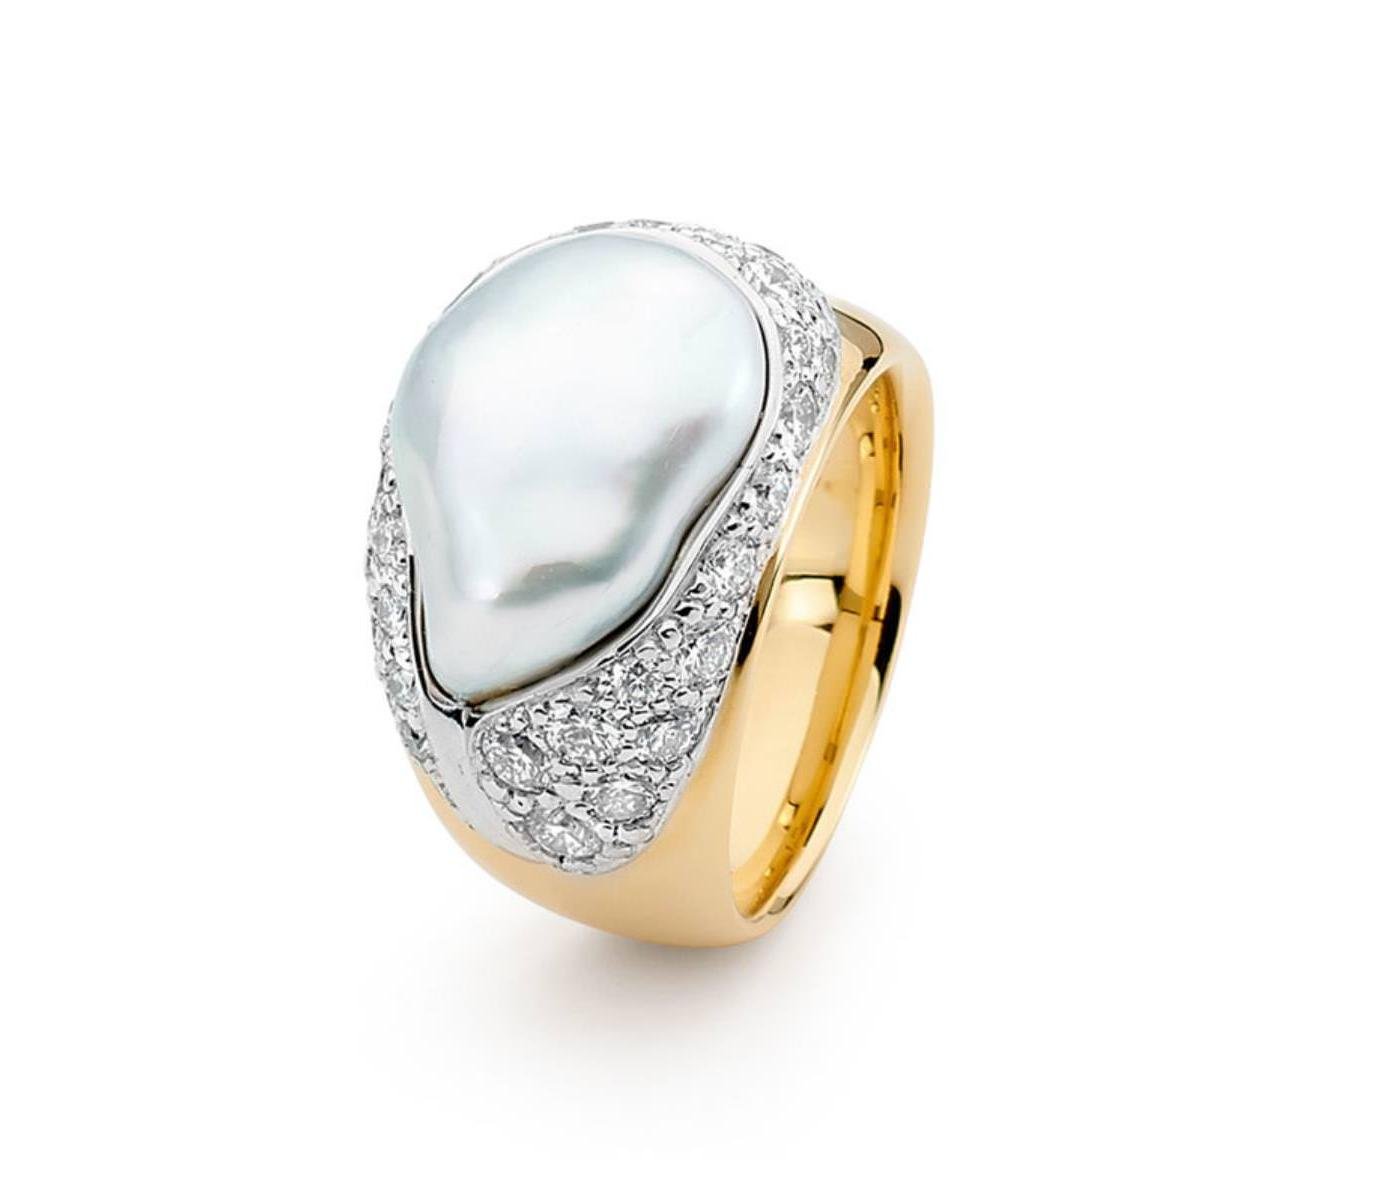 Ring by Allure